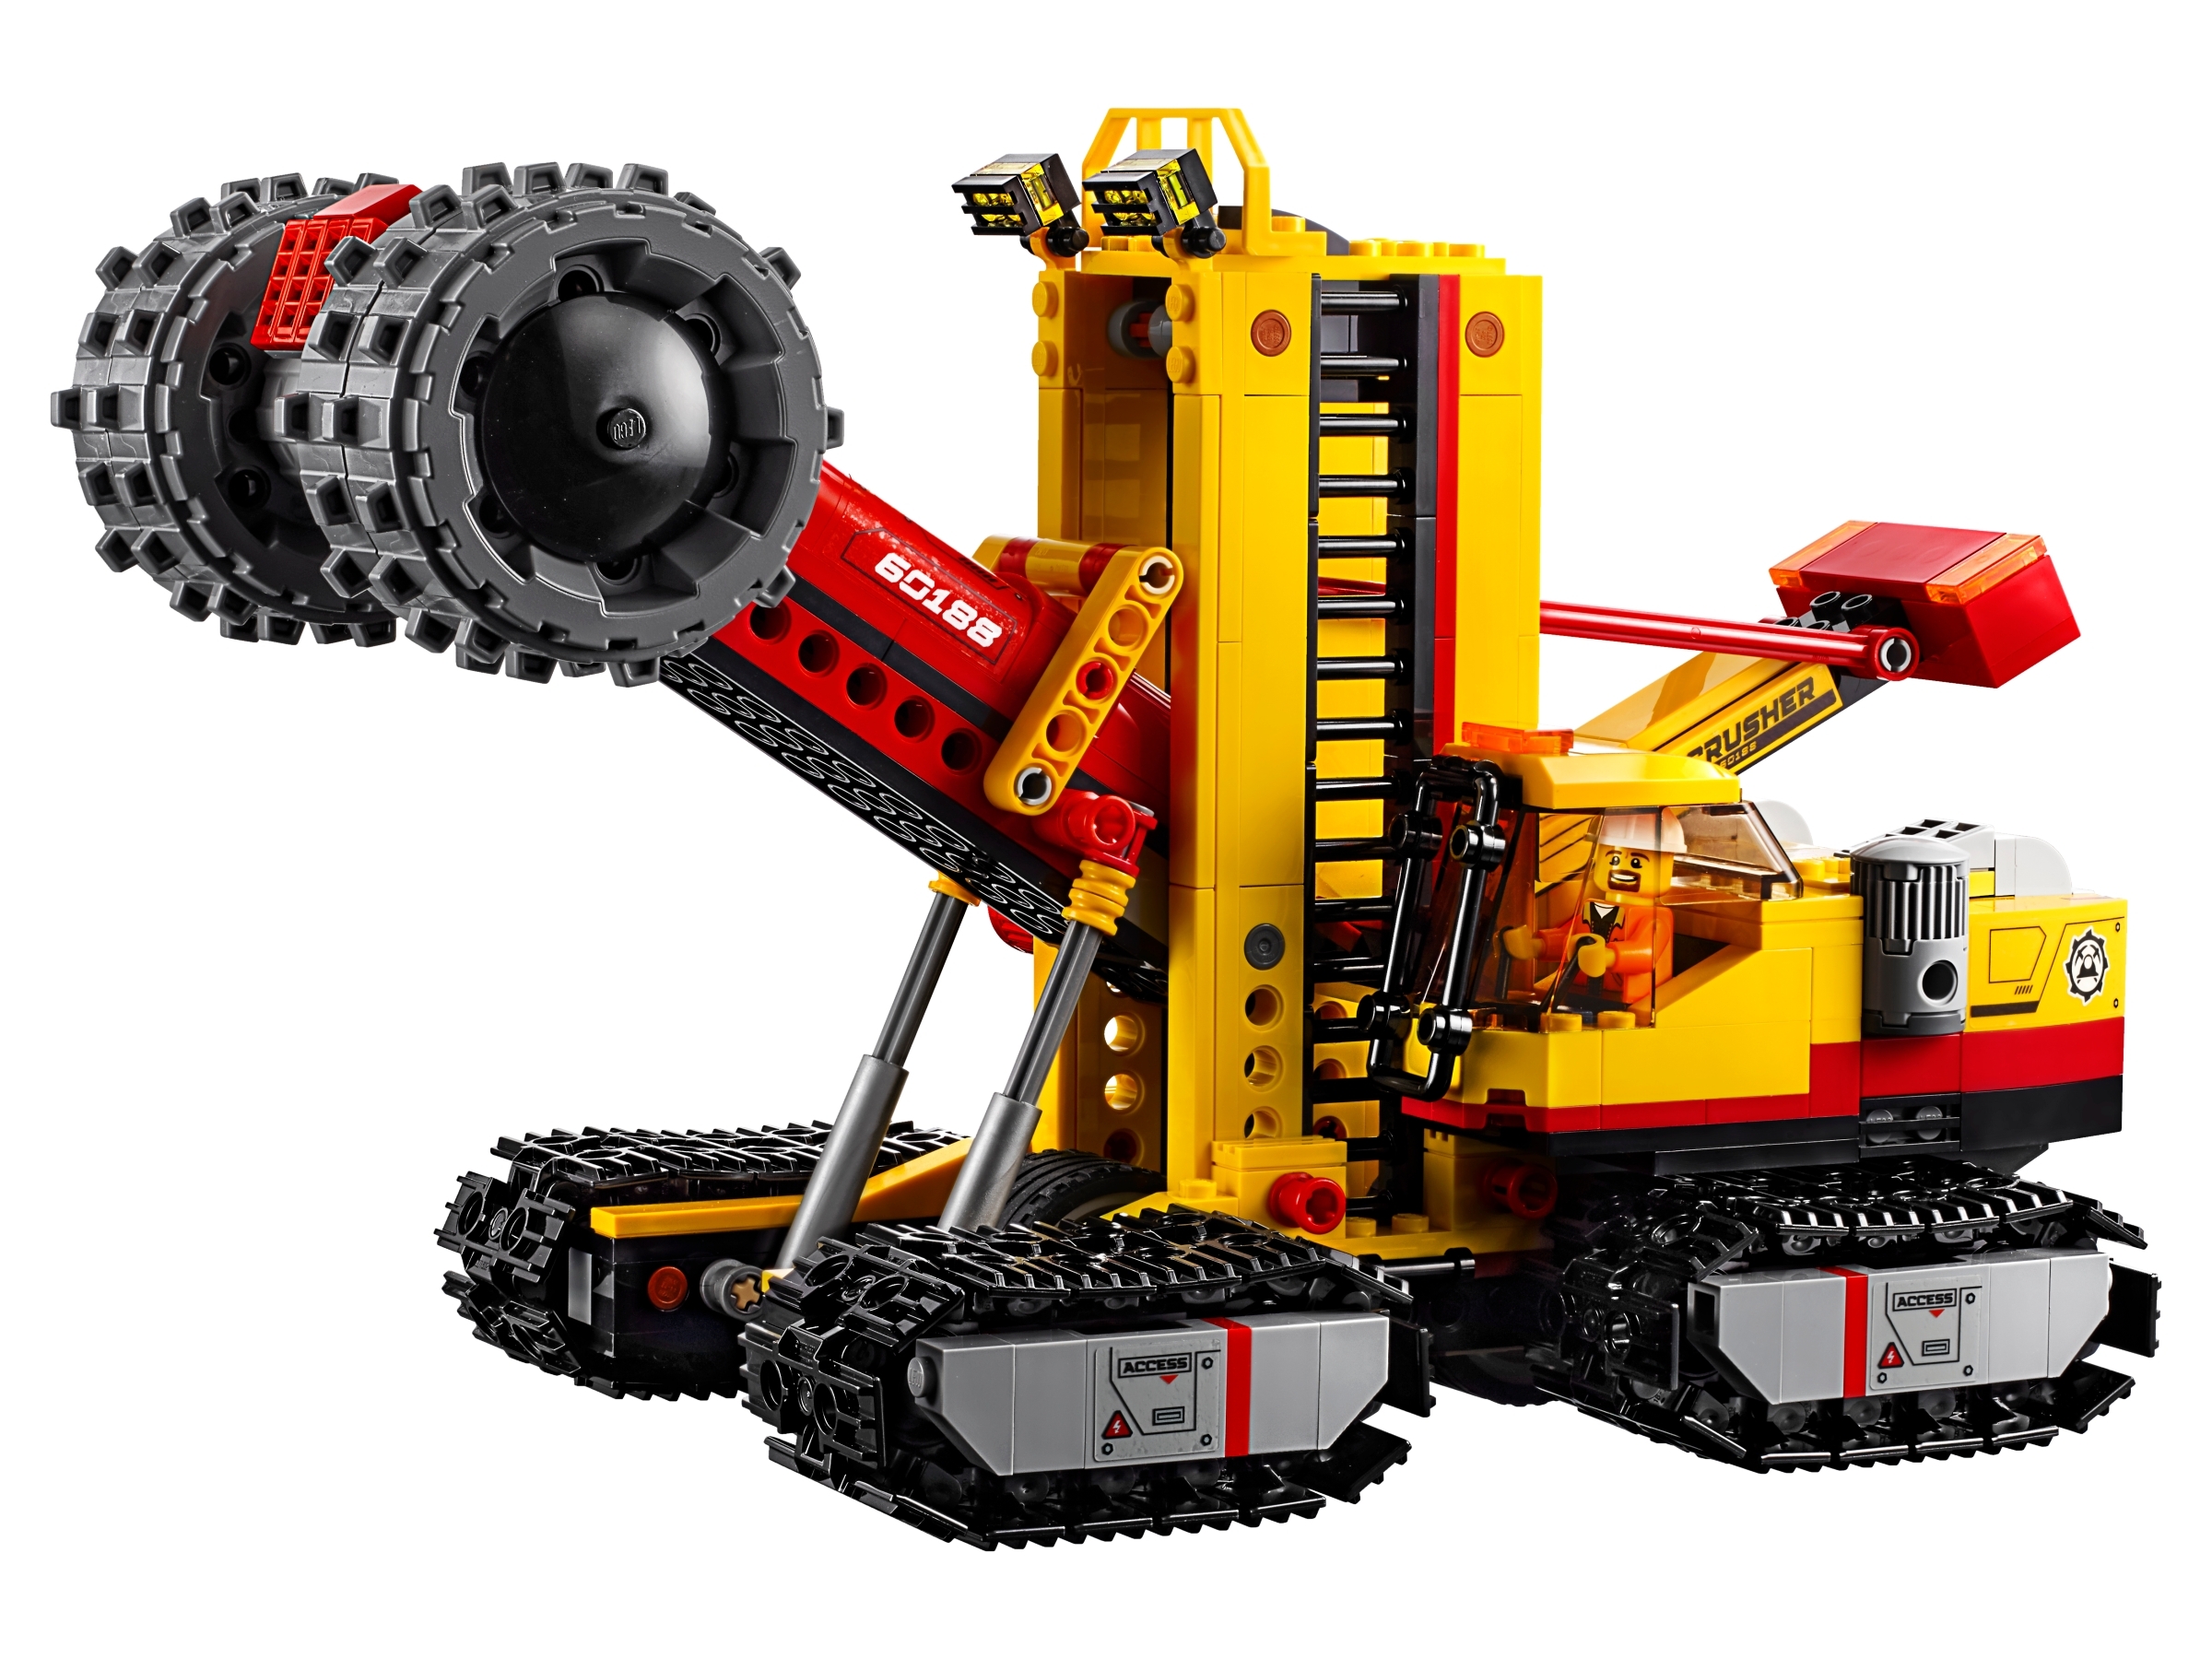 lego city 60188 mining experts site